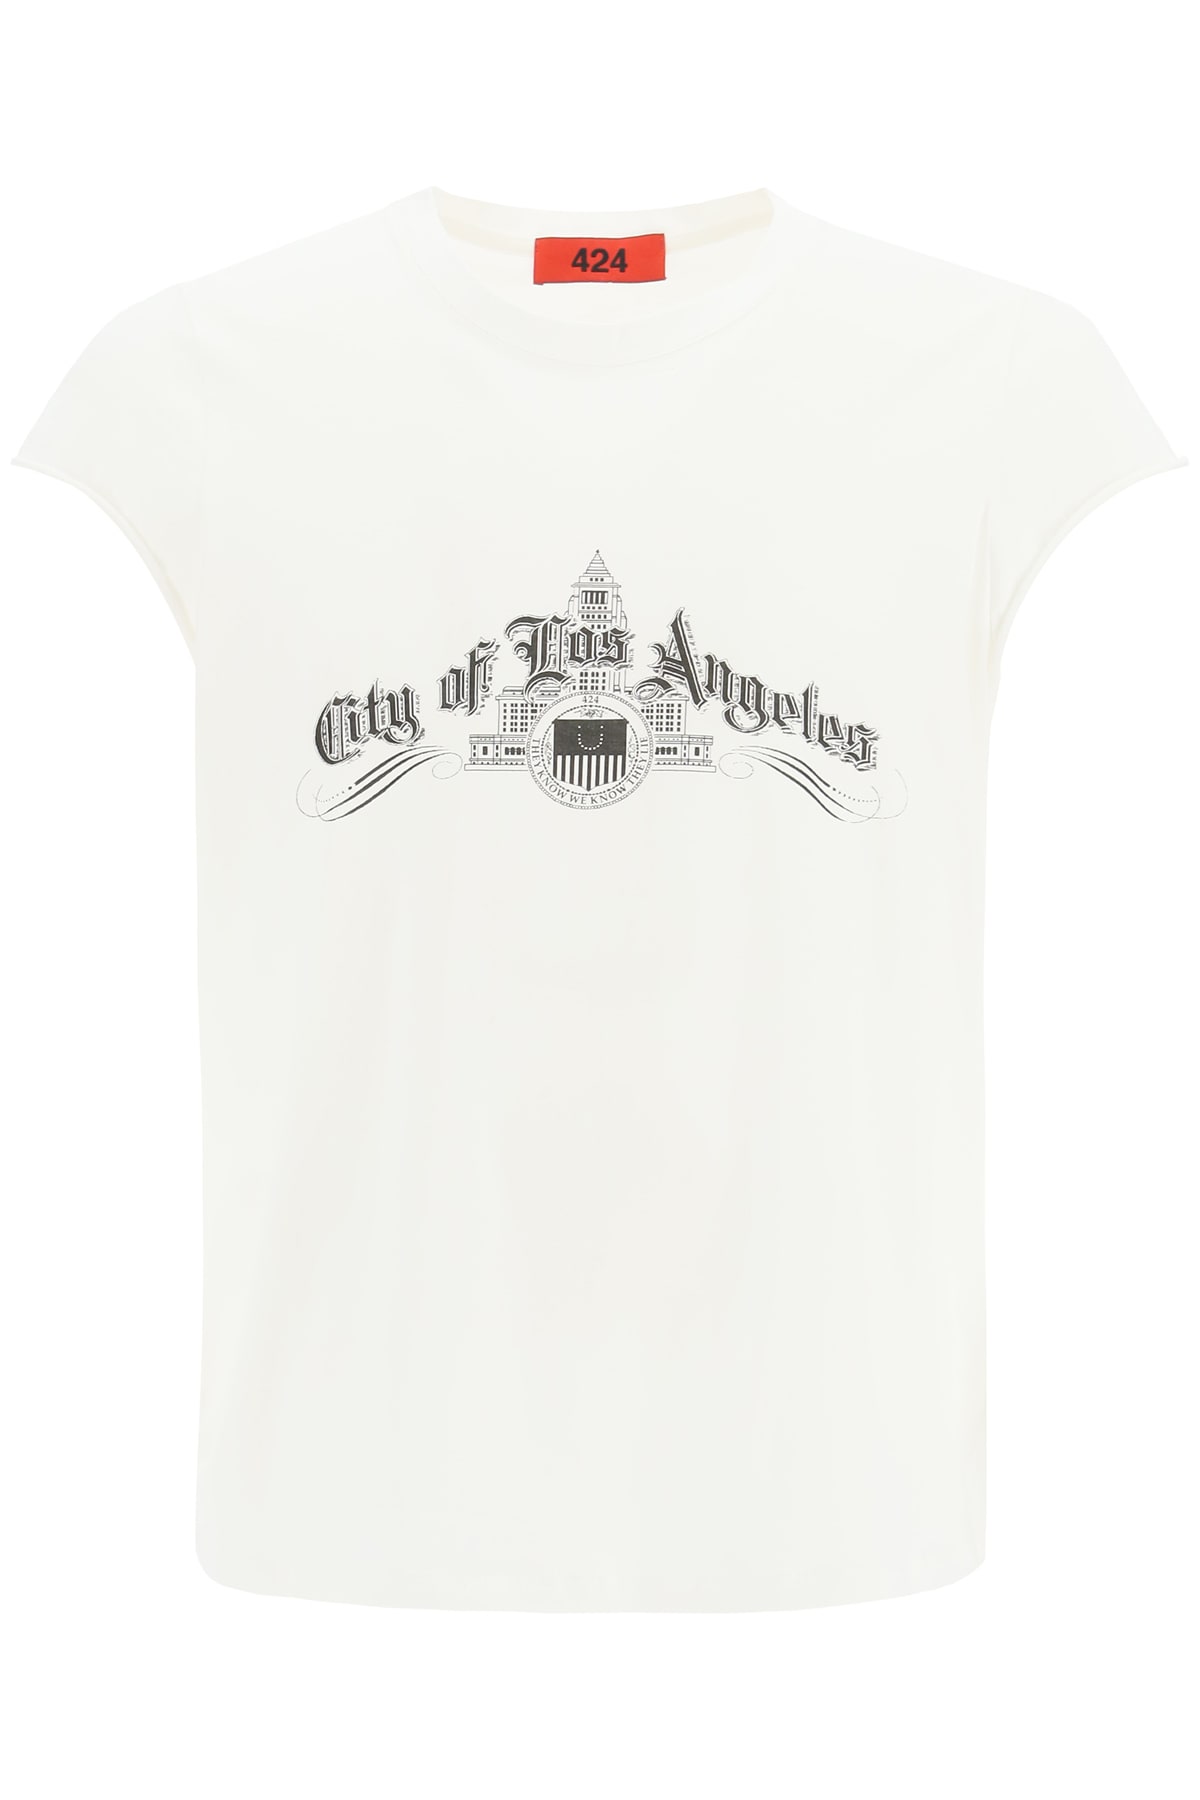 FourTwoFour on Fairfax City Of Los Angeles T-shirt